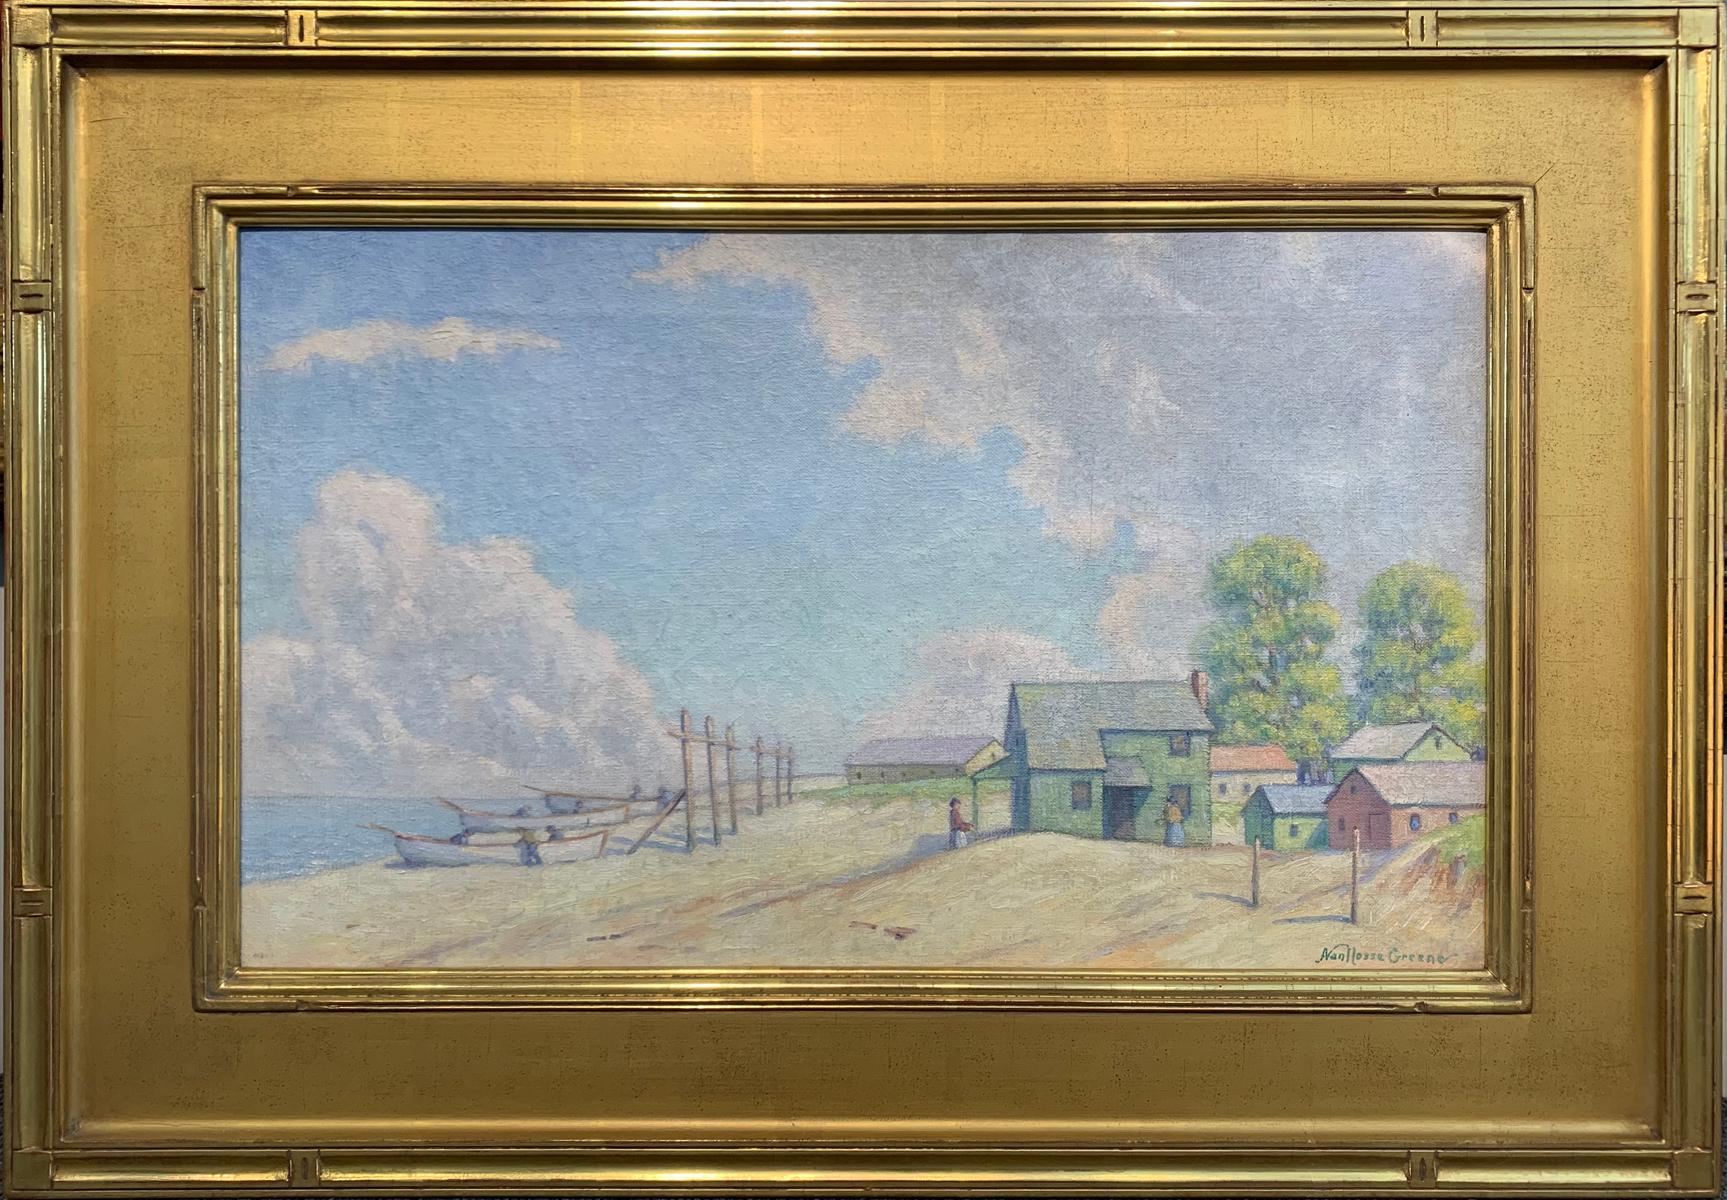 Figures, Boats, and House - Cape May Point, NJ, Impressionist Beach Scene, 1940s